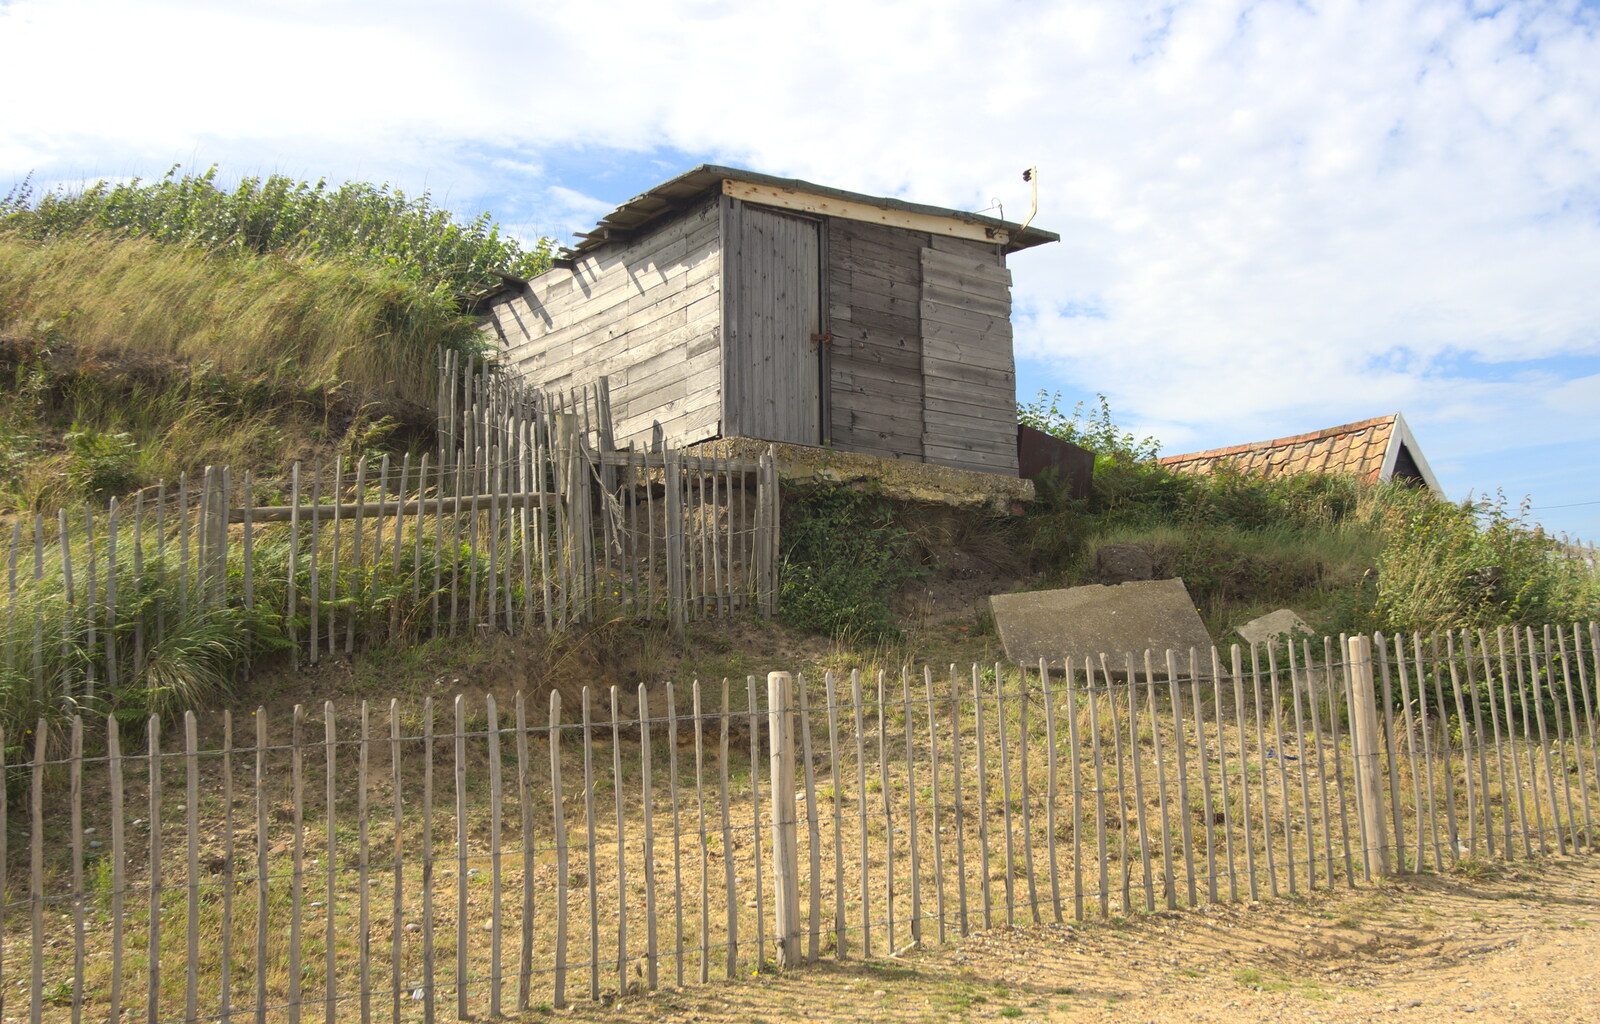 Strange beach hut perched on a hill from Camping by the Seaside, Cliff House, Dunwich, Suffolk - 15th August 2012